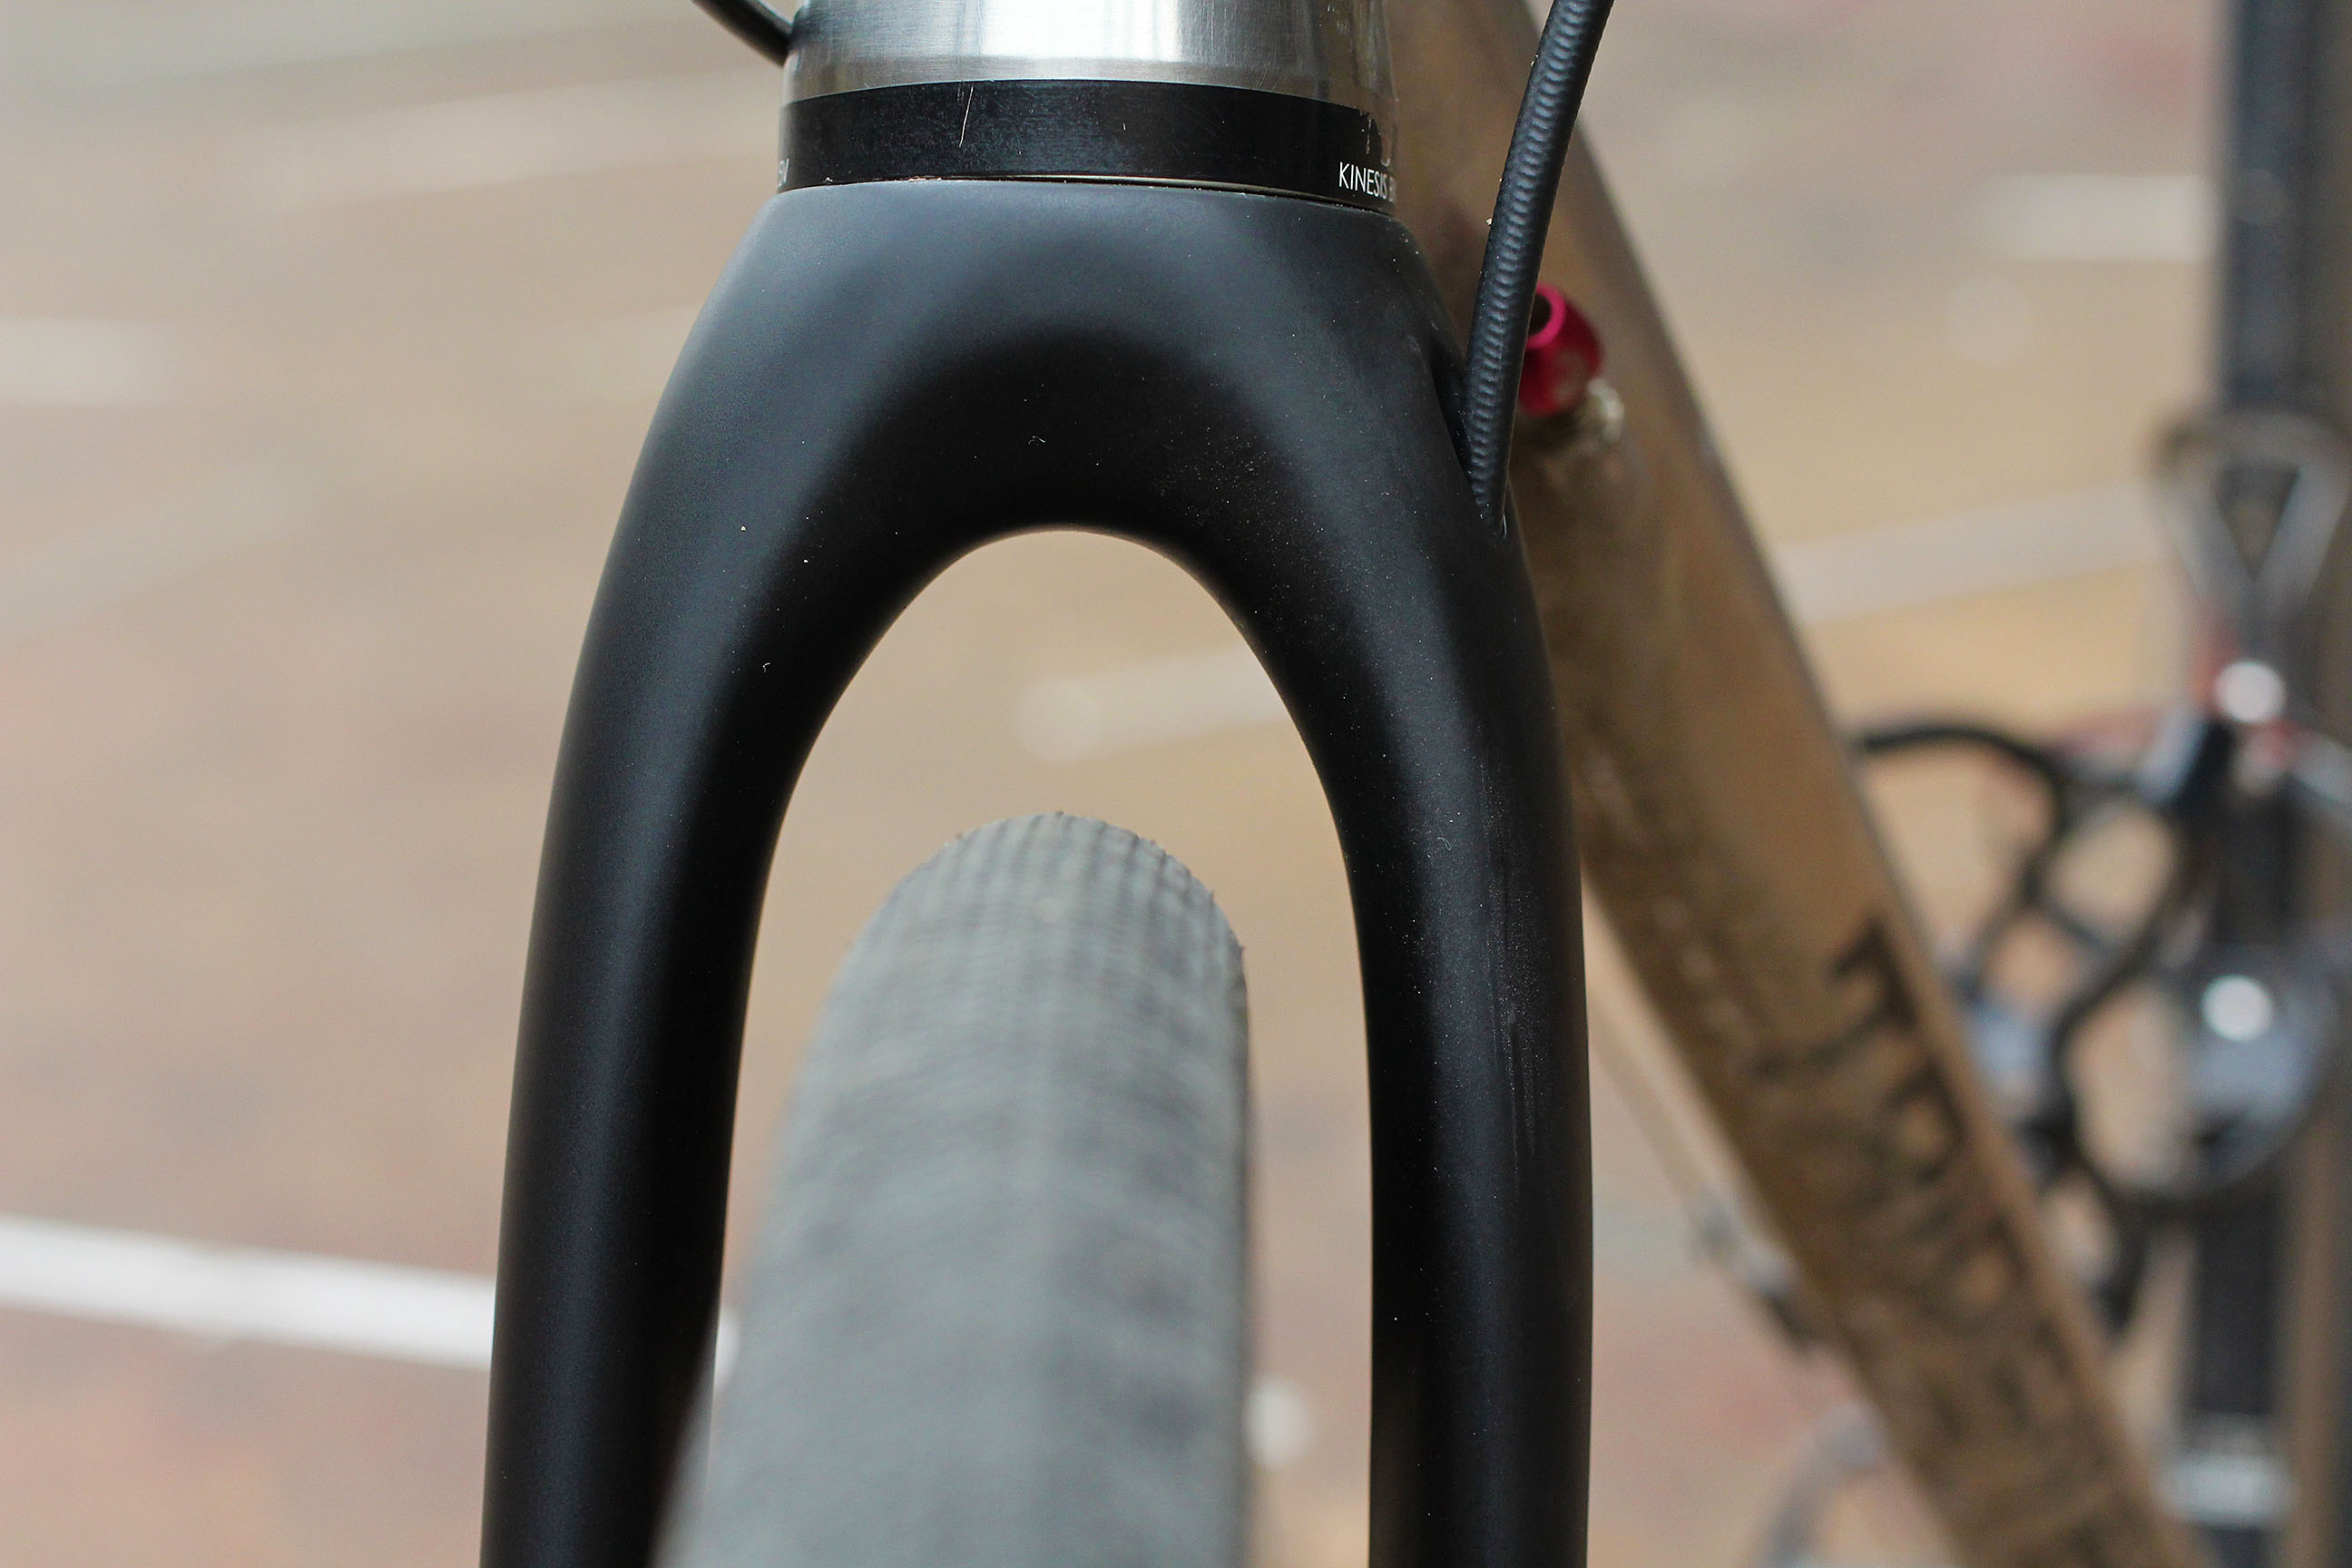 cyclocross forks